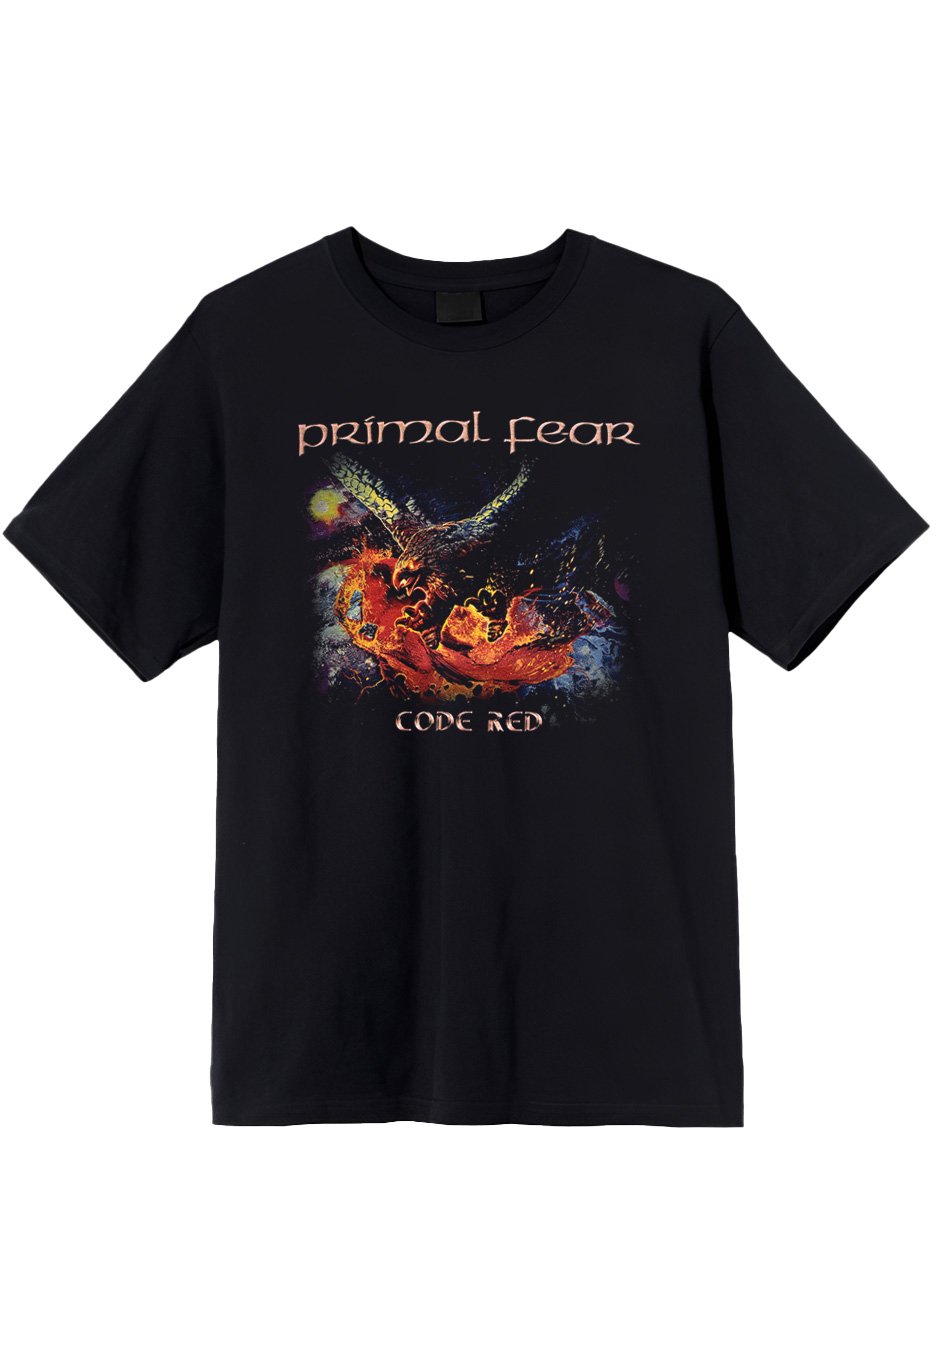 Primal Fear - Code Red - T-Shirt